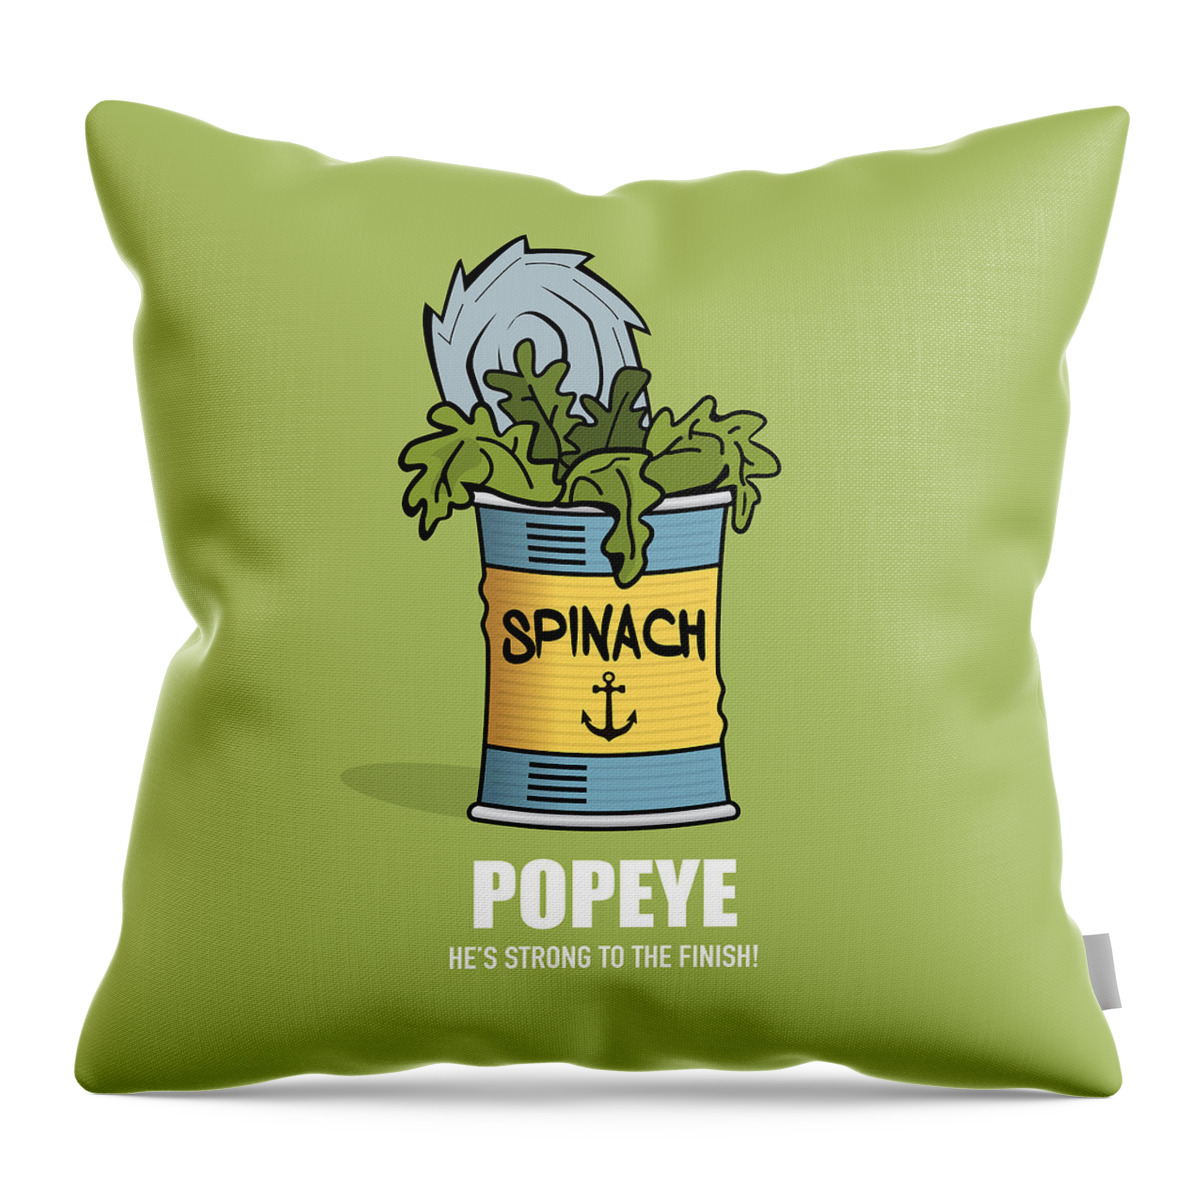 Popeye Throw Pillow featuring the digital art Popeye - Alternative Movie Poster by Movie Poster Boy